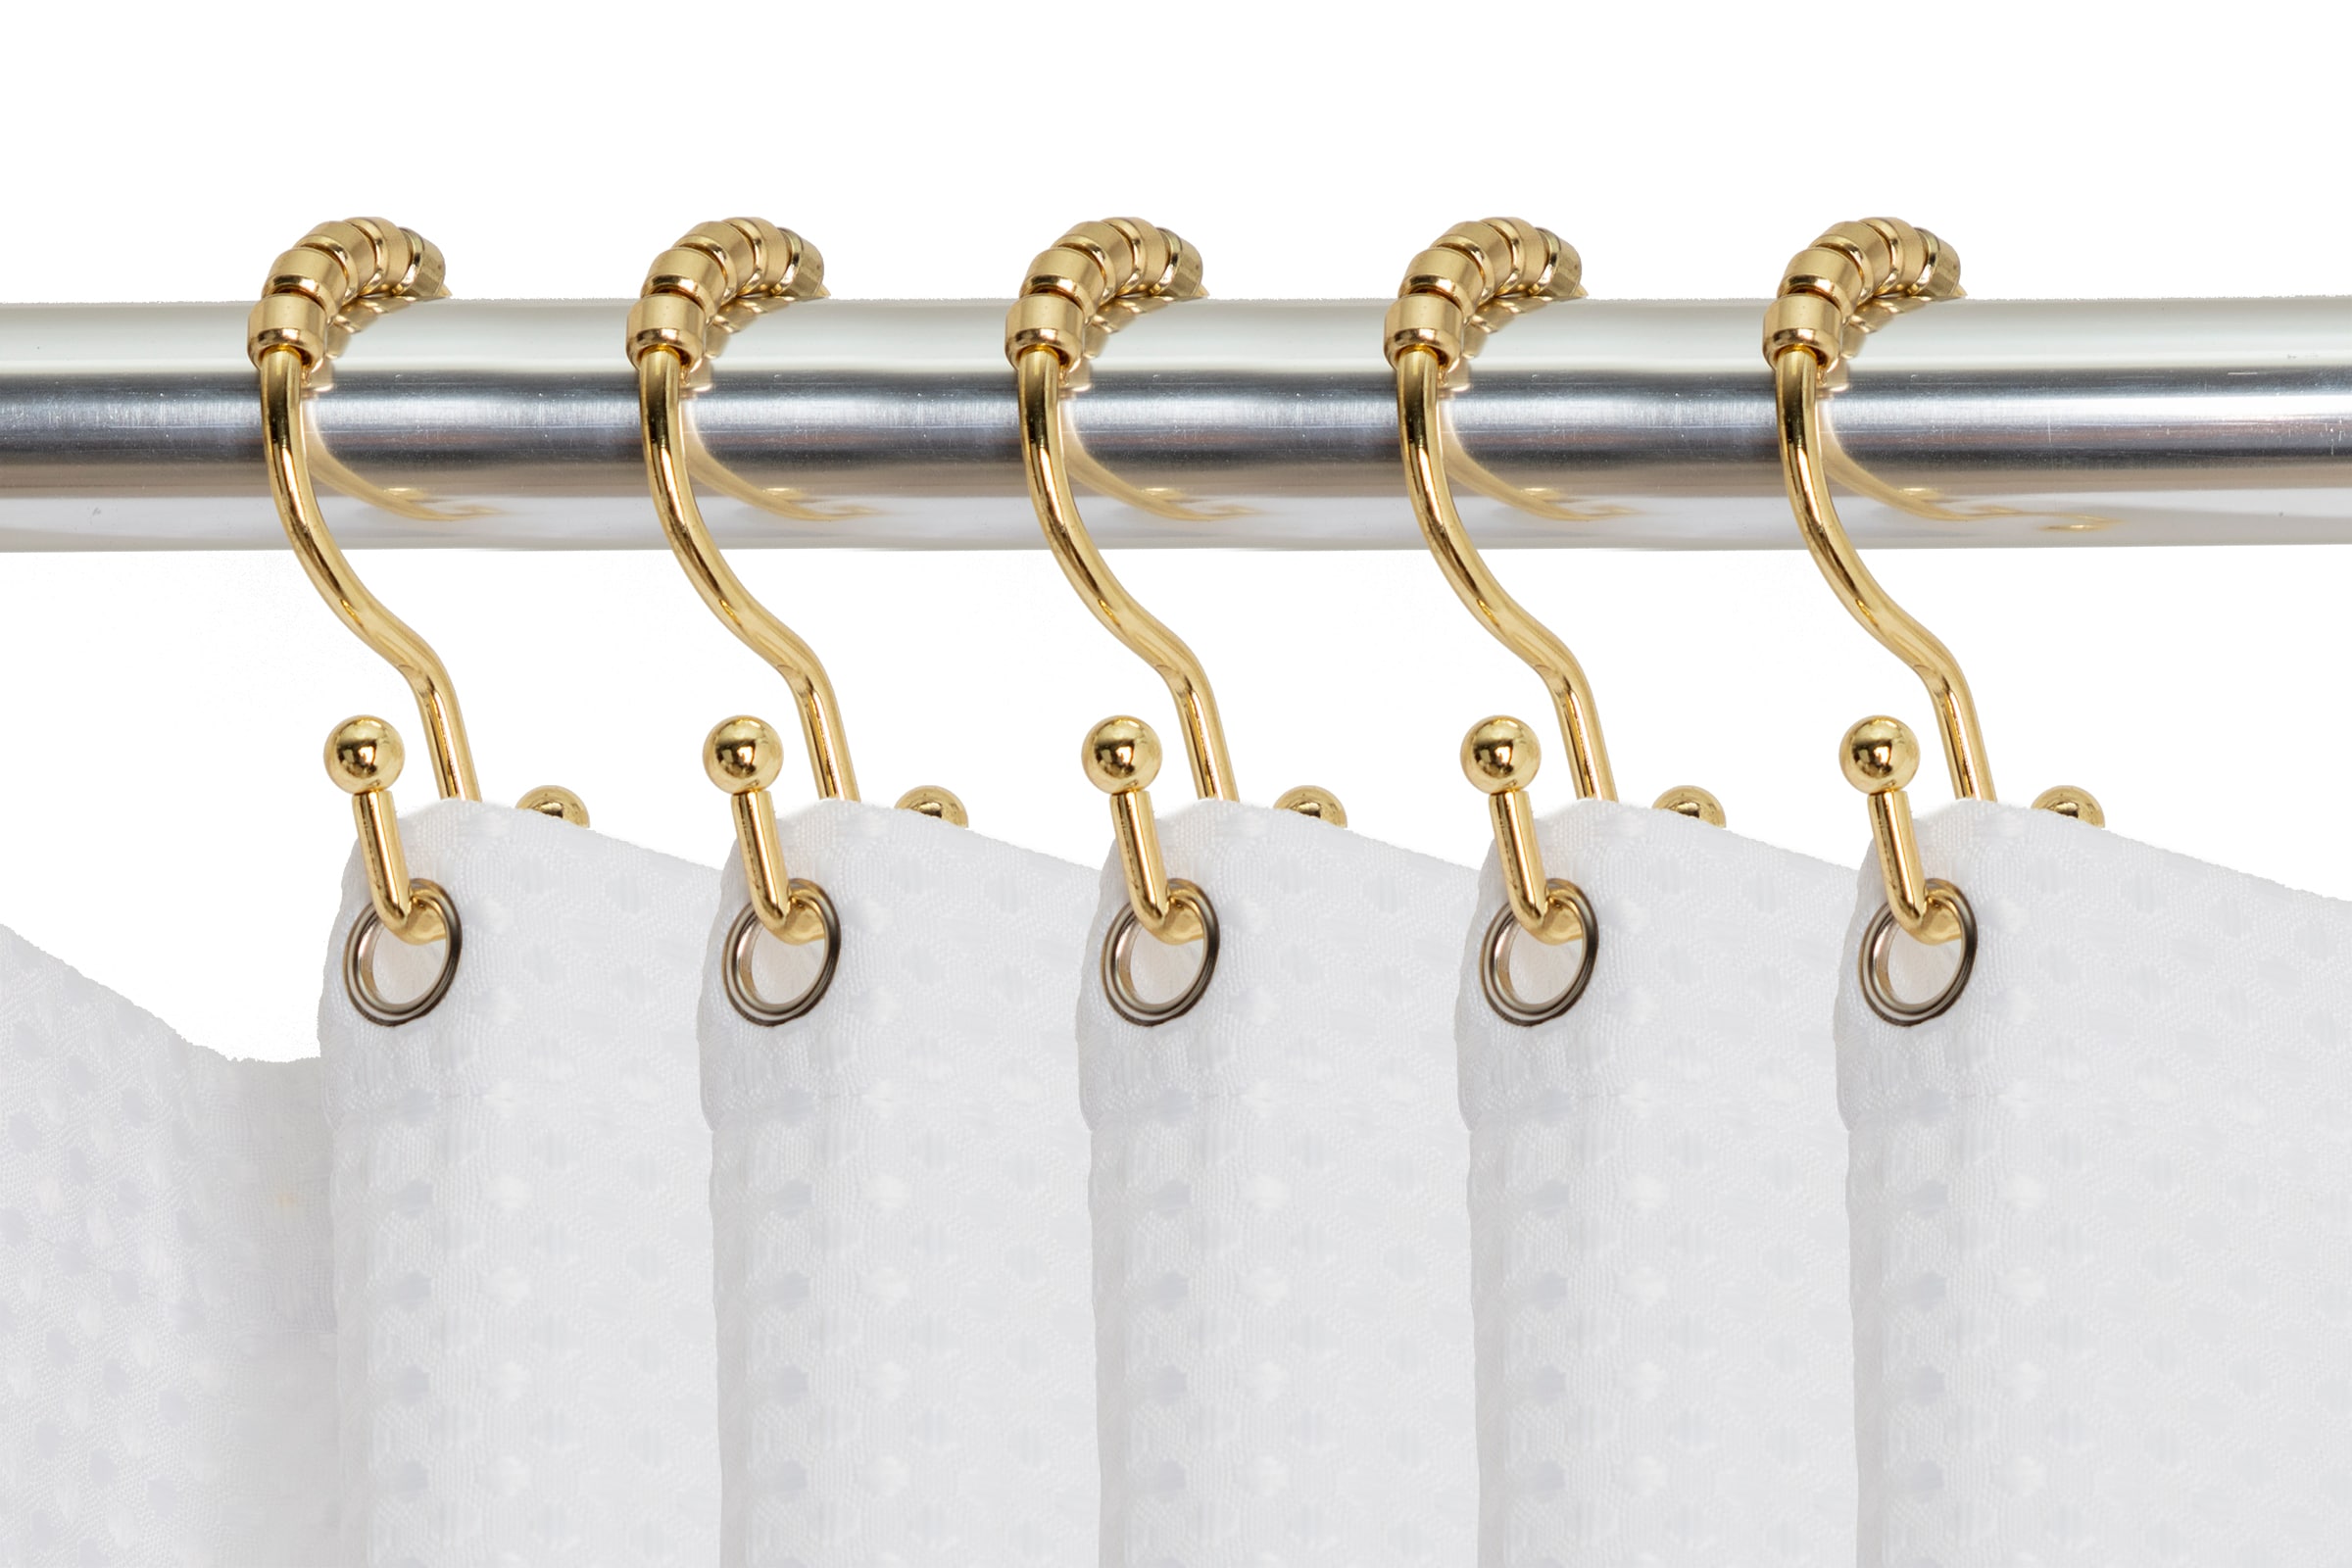 Utopia Alley Gold Iron Double Shower Curtain Hooks (12-Pack) at